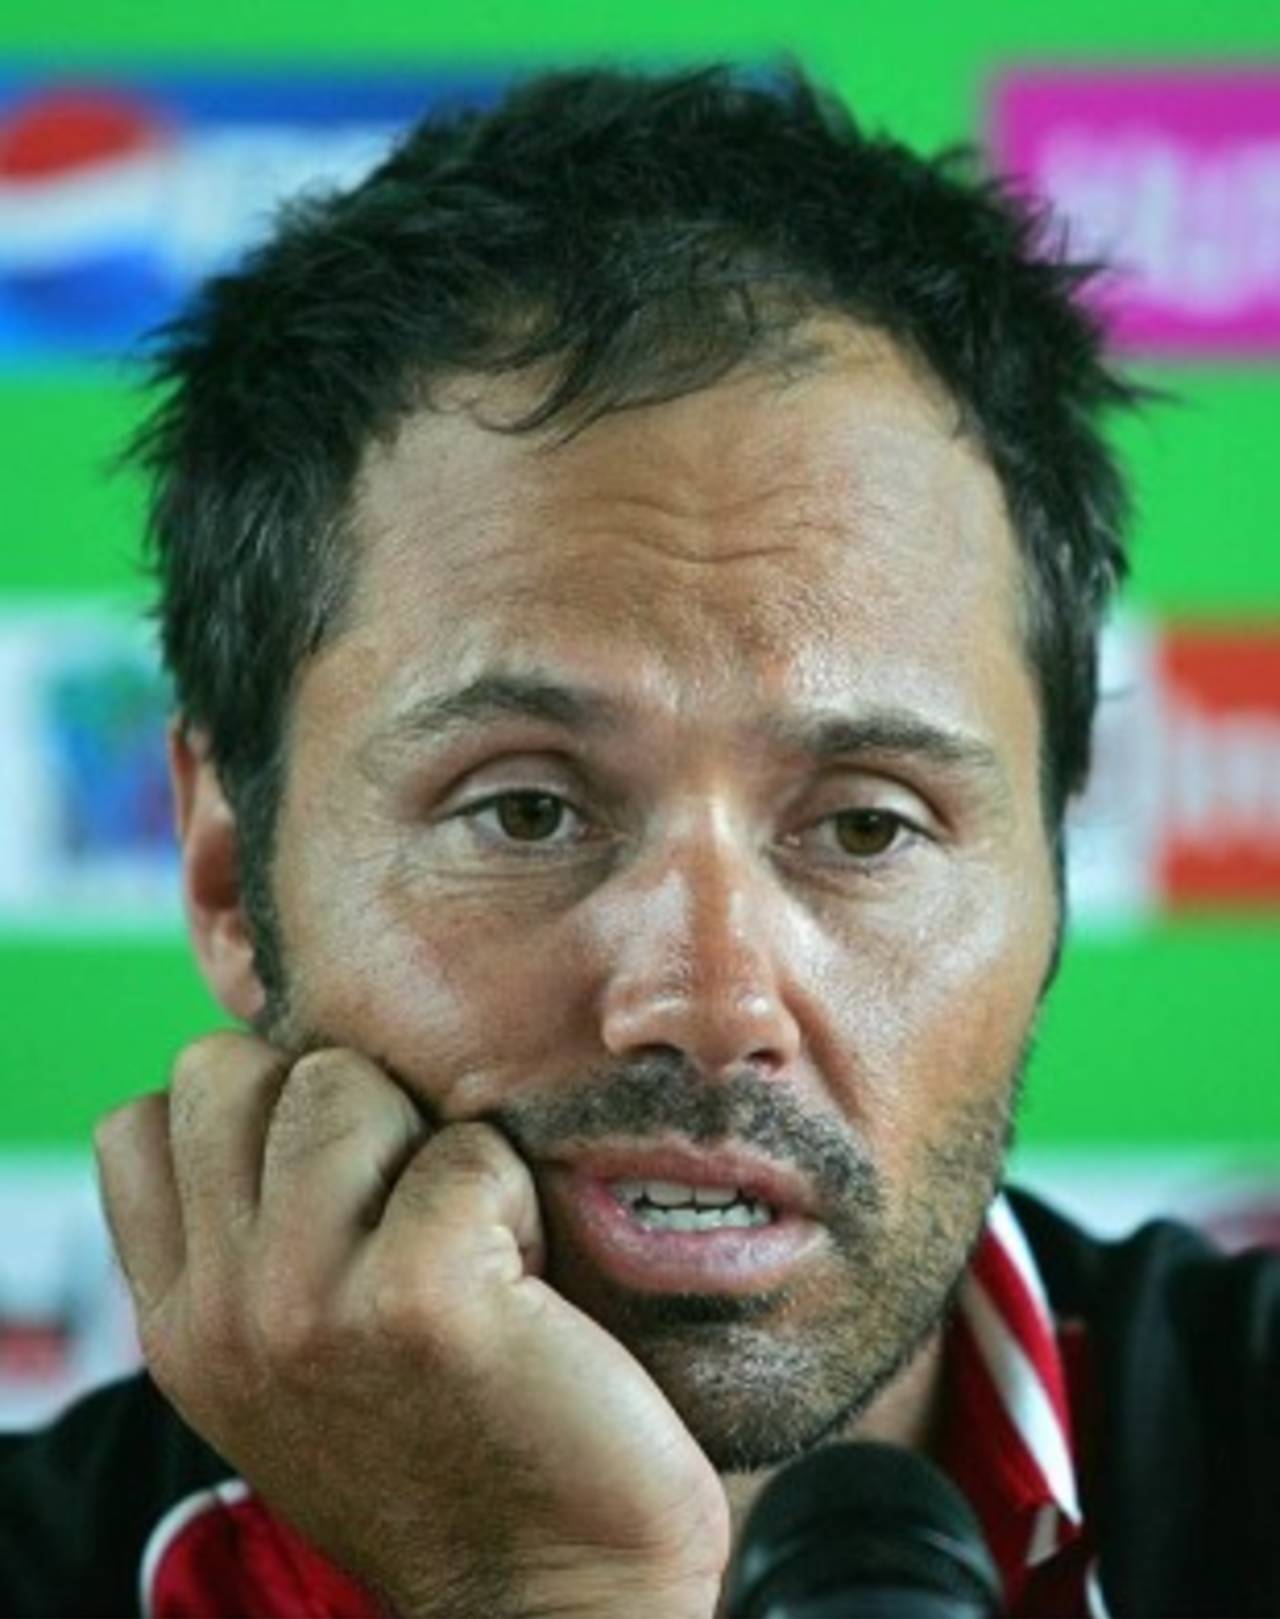 John Davison speaks to the media after Canada's warm-up loss to Ireland, University of West Indies stadium, near Port of Spain, March 8, 2007